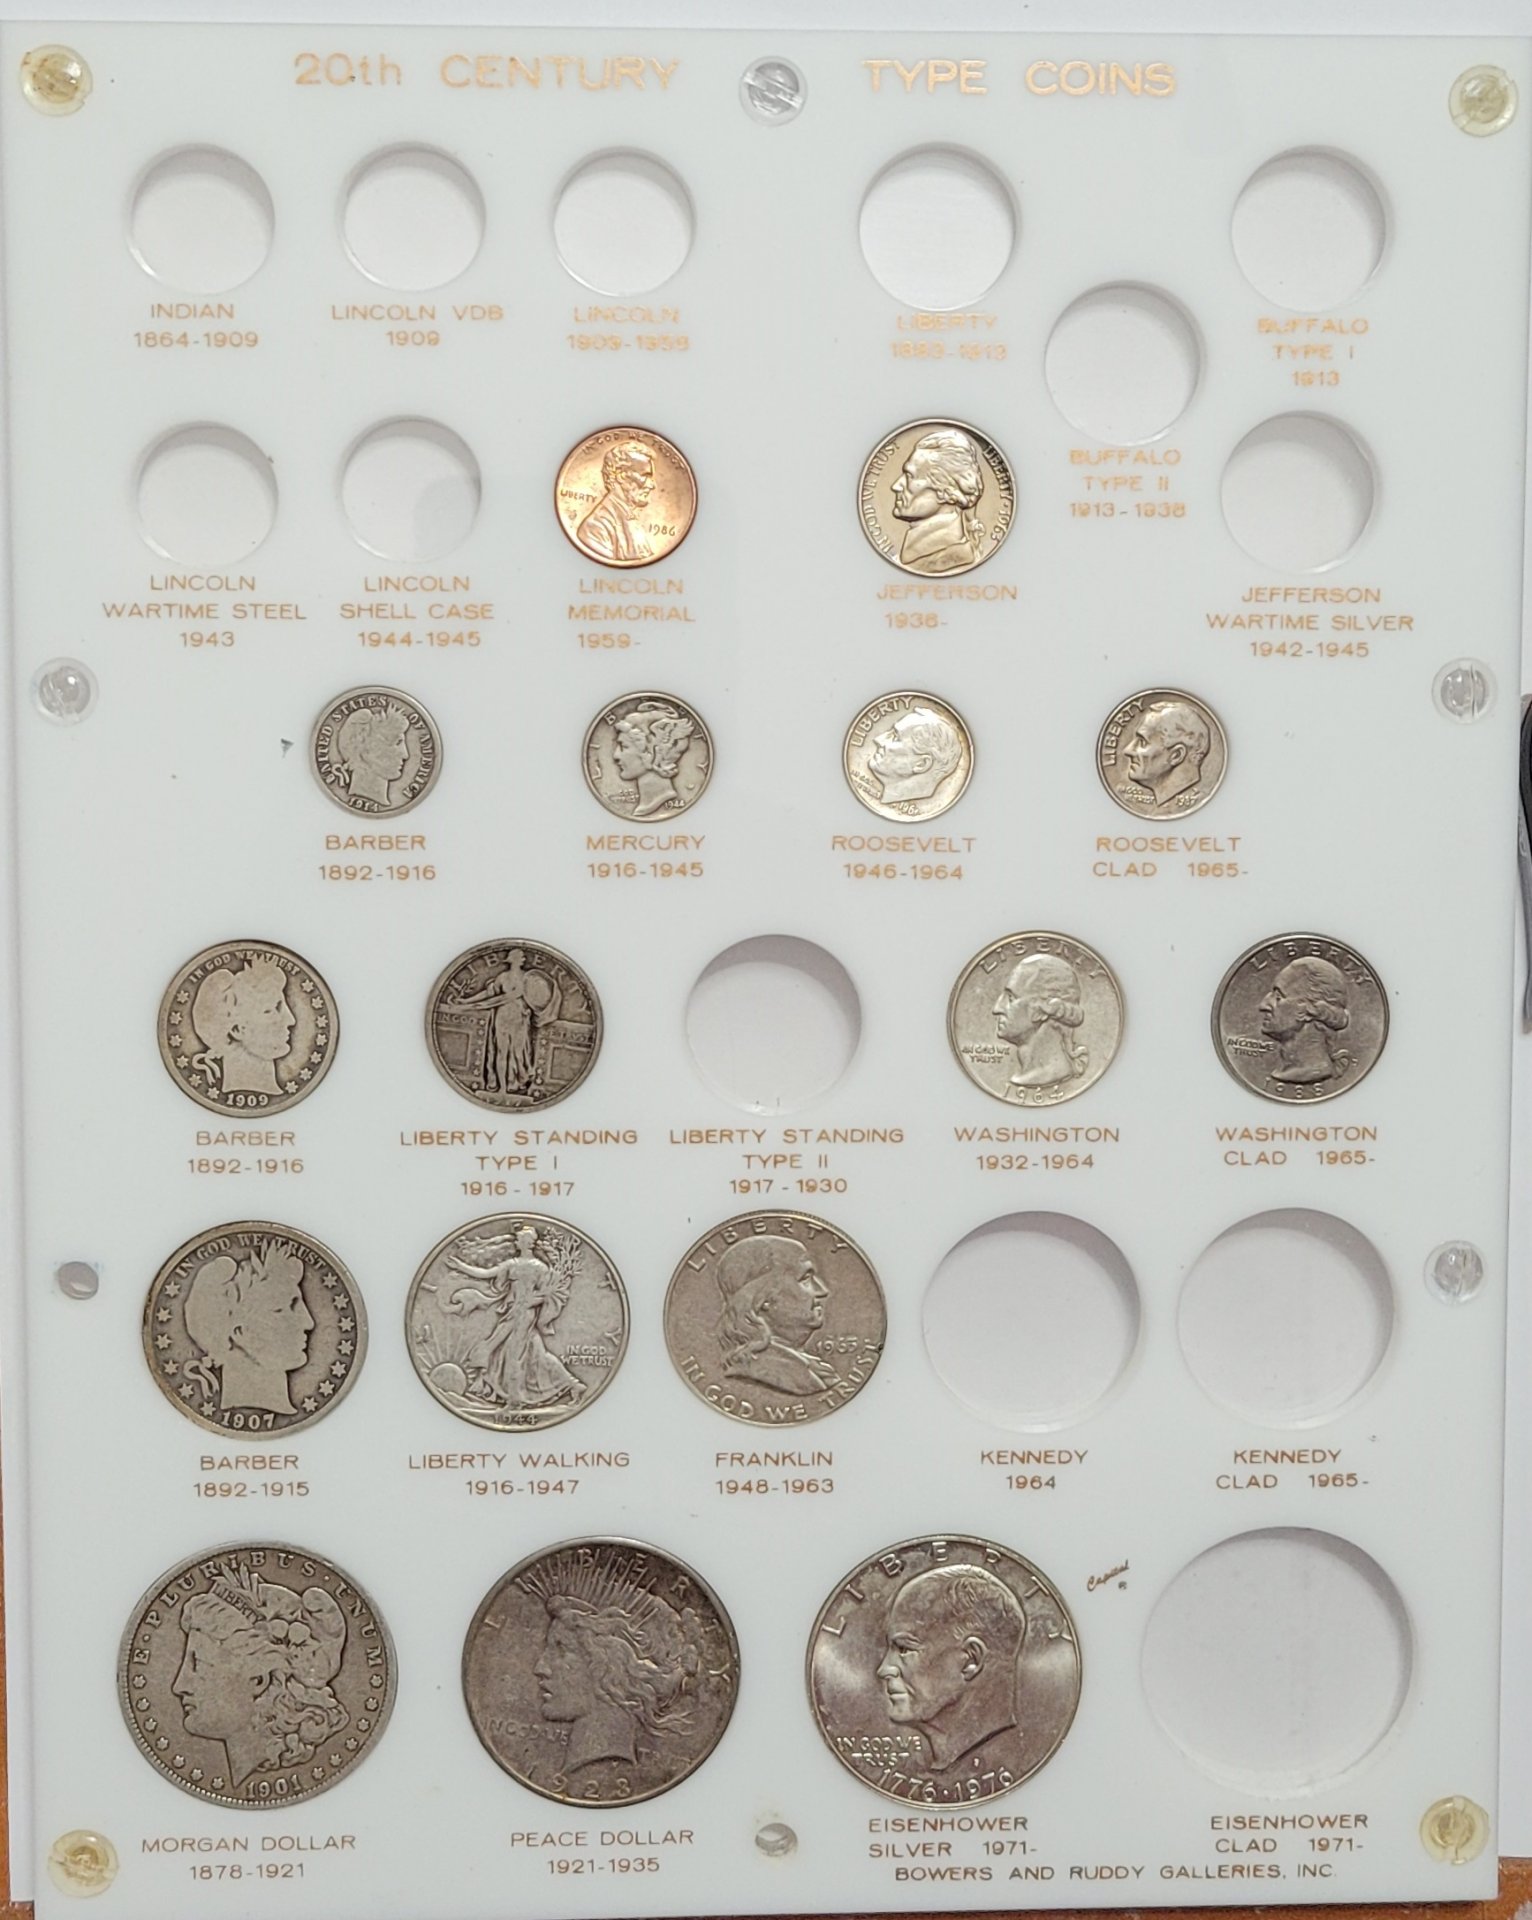 20th-Century-Type-Coins